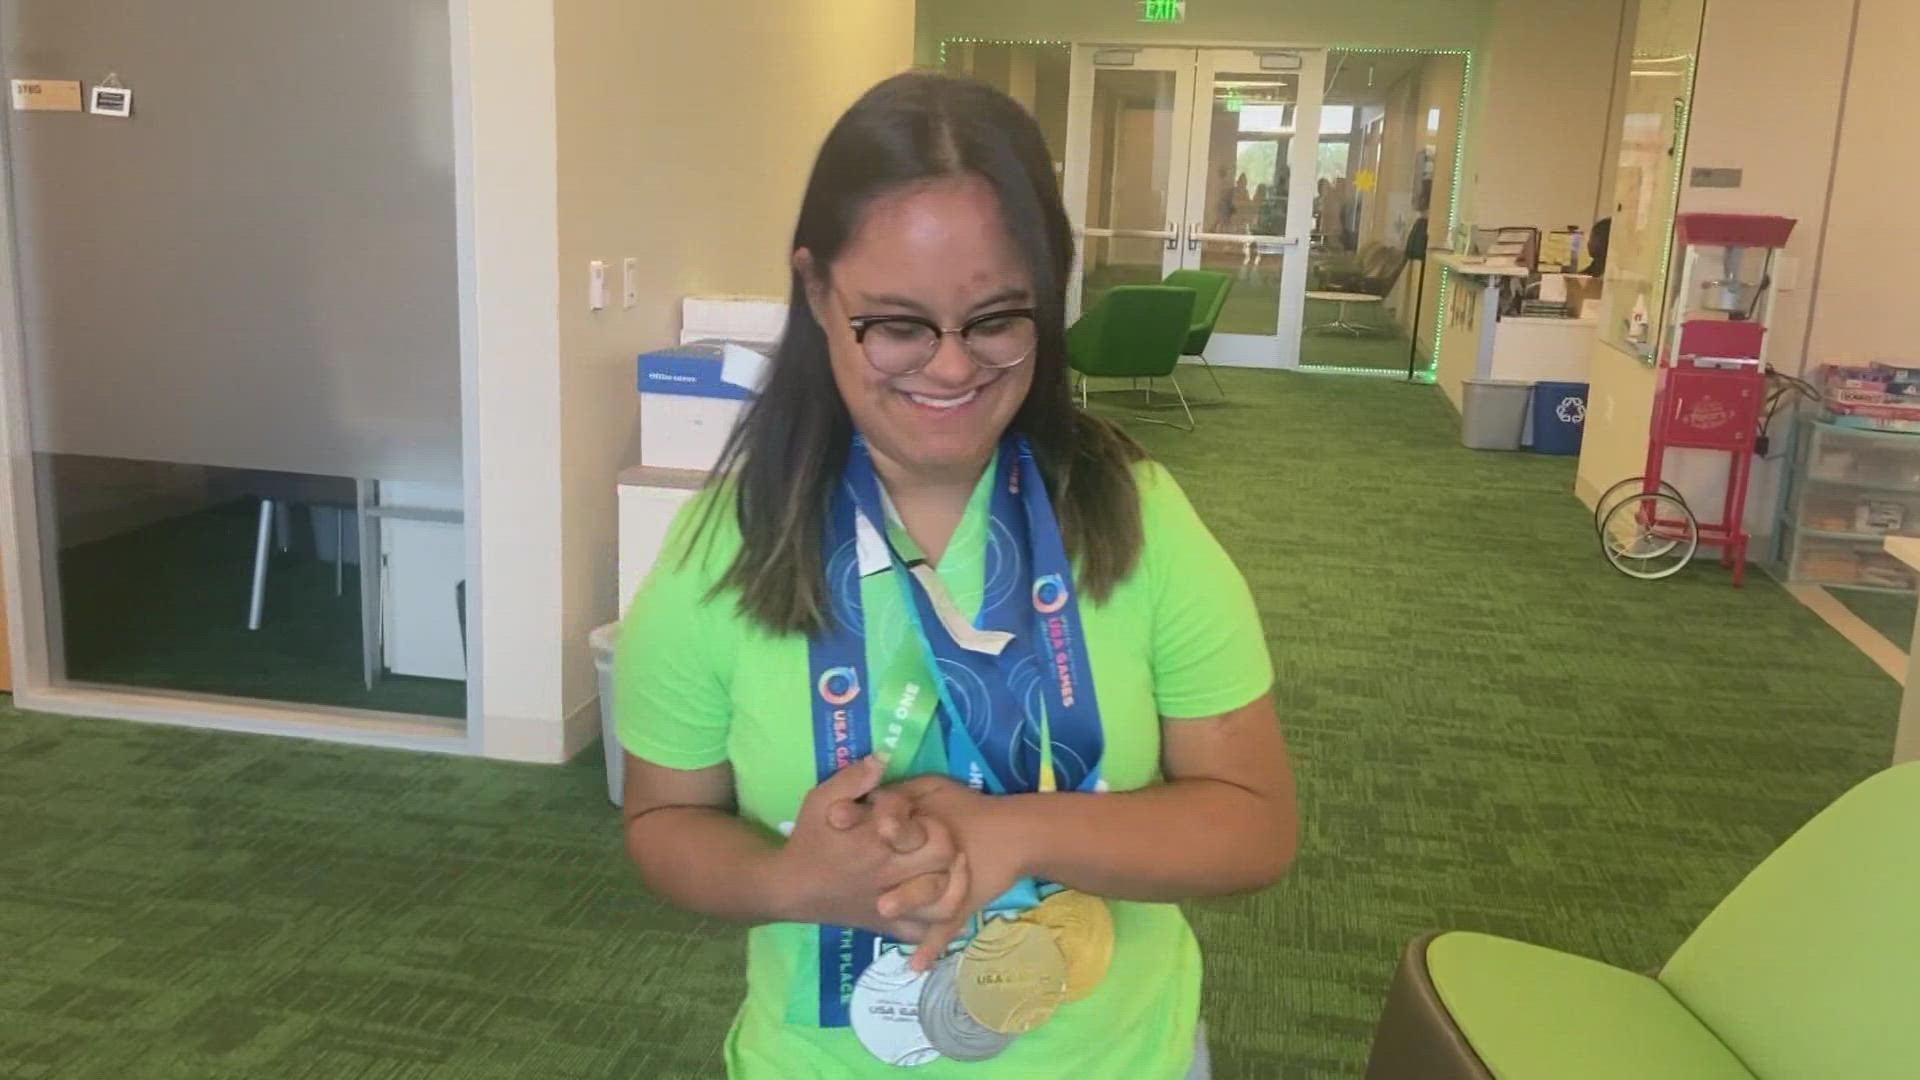 Pilar Rivera is getting everything in order for her big move to Denton in August, which includes packing her gold medals from the Special Olympics USA Games.